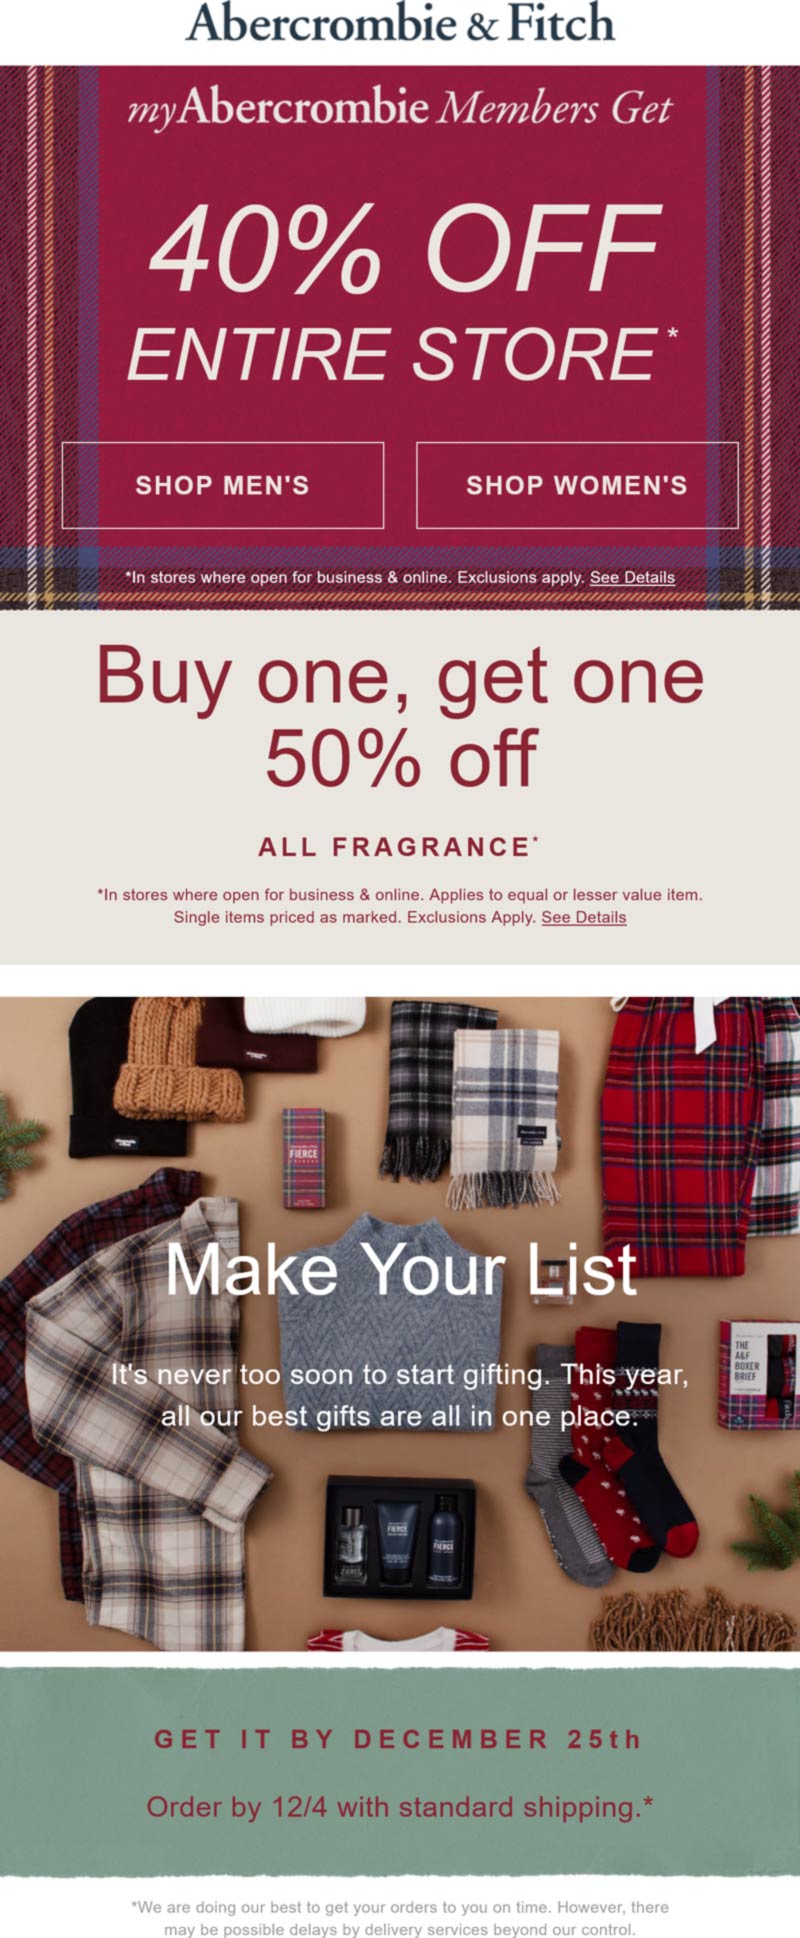 Abercrombie & Fitch stores Coupon  40% off everything at Abercrombie & Fitch, ditto online #abercrombiefitch 